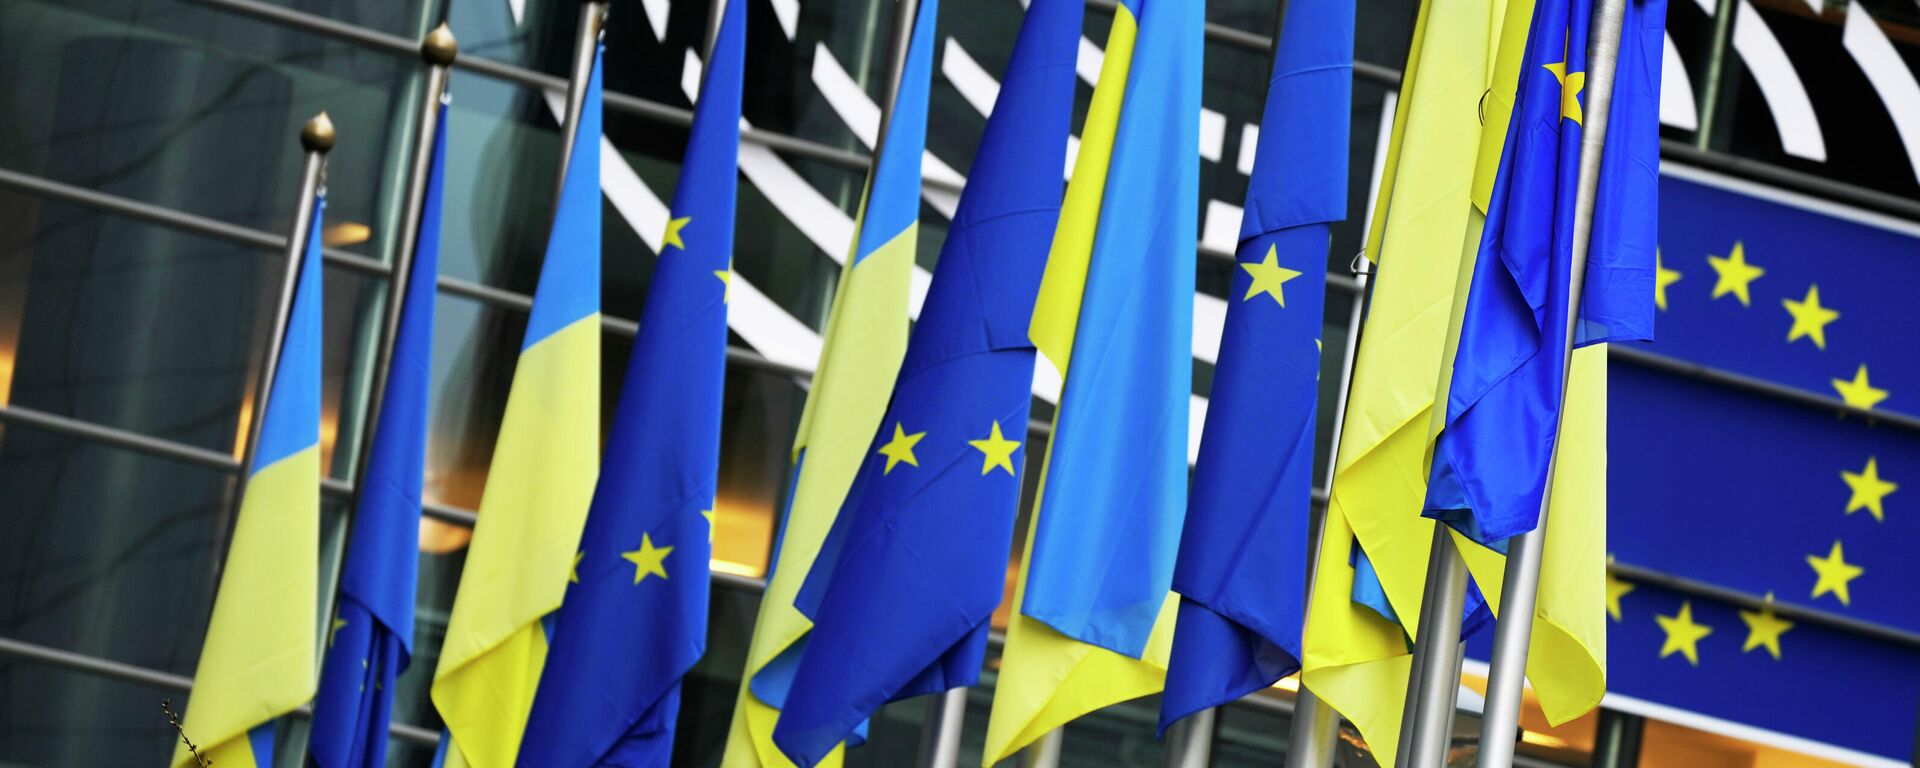 Ukraine and European Union flags hang together on the exterior of the building prior to an extraordinary plenary session on Ukraine at the European Parliament in Brussels, Tuesday, March 1, 2022 - Sputnik International, 1920, 17.10.2022